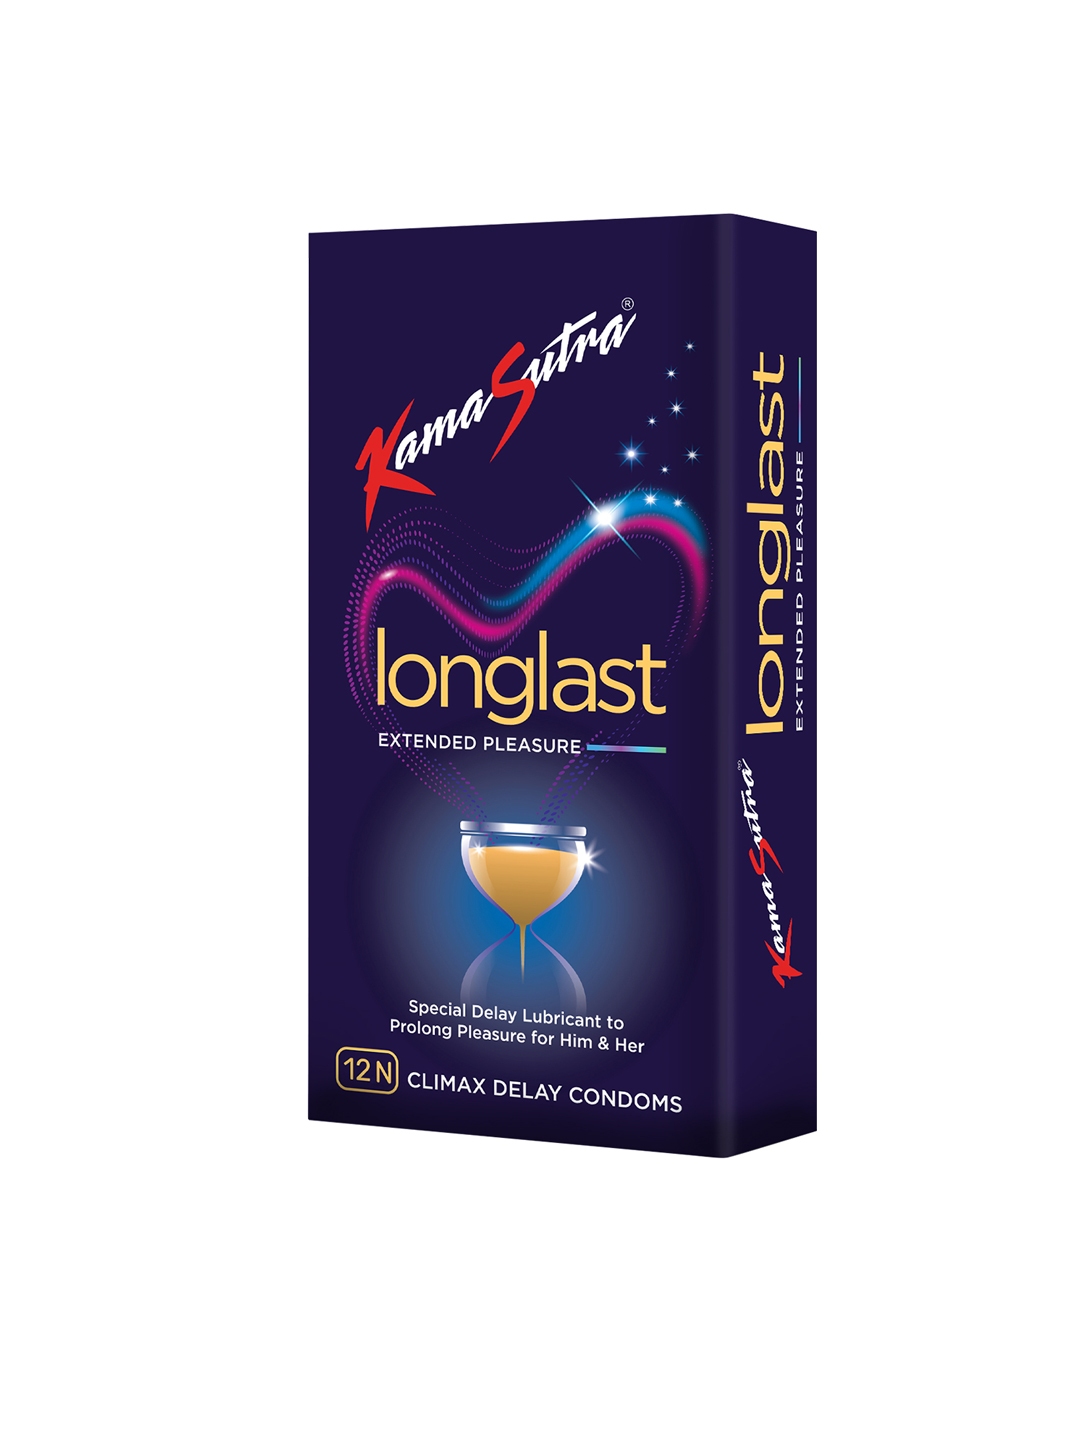 Buy Kamasutra Long Last Dotted Lubricated Climax Control Condoms 12 Count Condoms For Men 6690